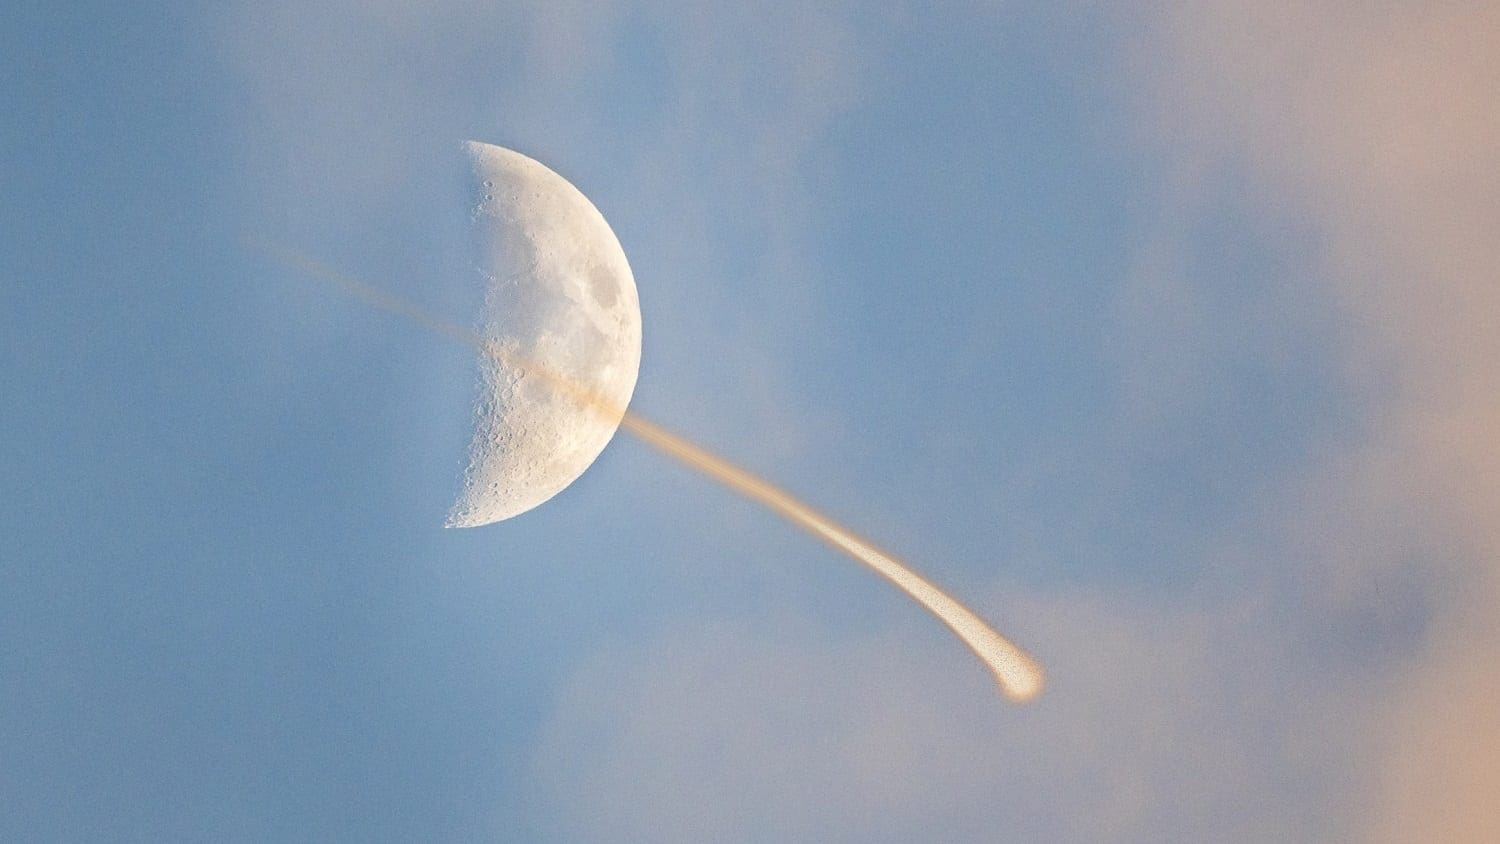 Meteor in front of the waxing moon: ID 140238662 © William Wise | Dreamstime.com